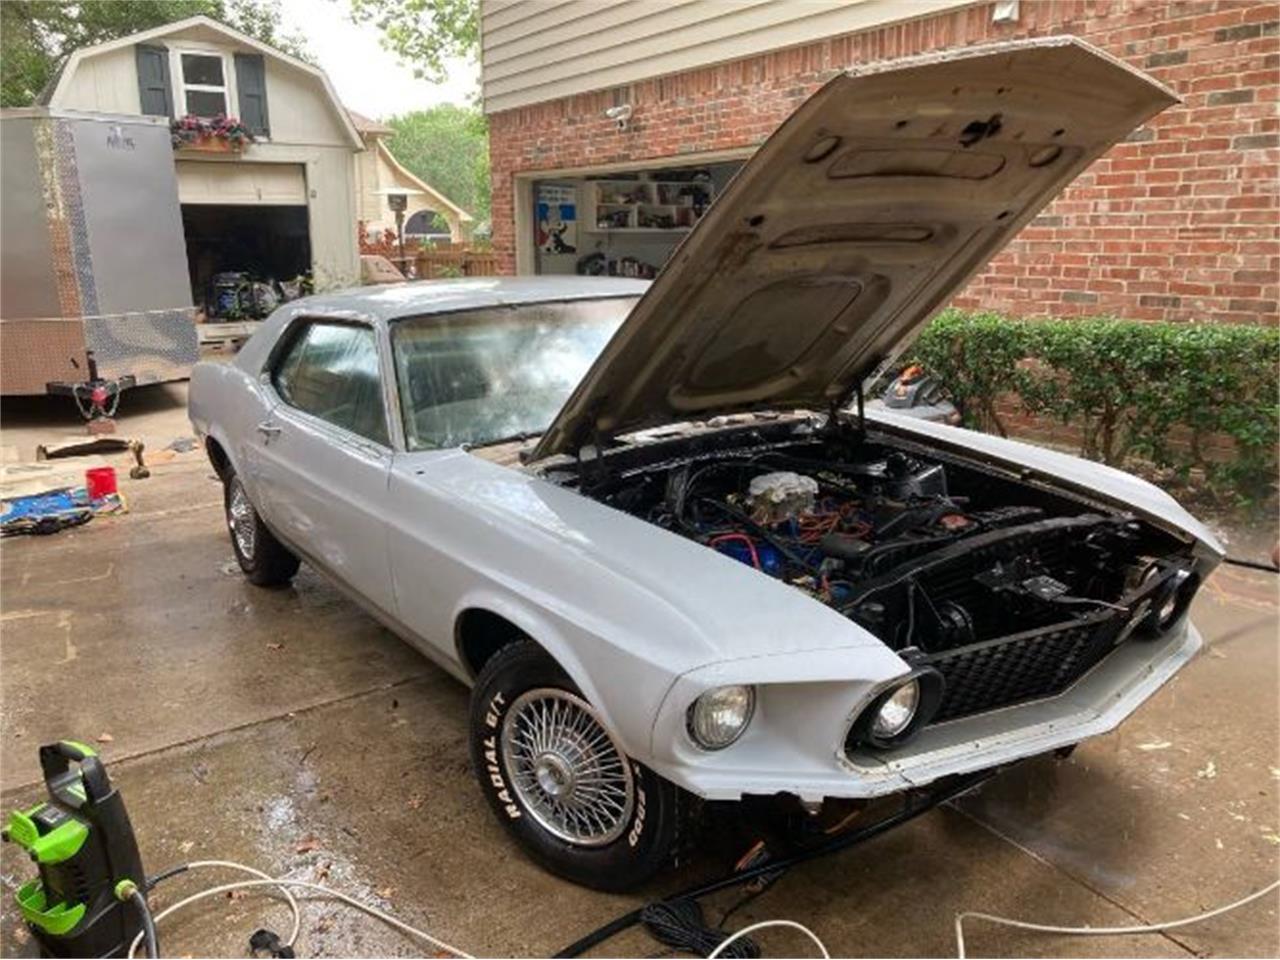 For Sale: 1969 Ford Mustang in Cadillac, Michigan for sale in Cadillac, MI